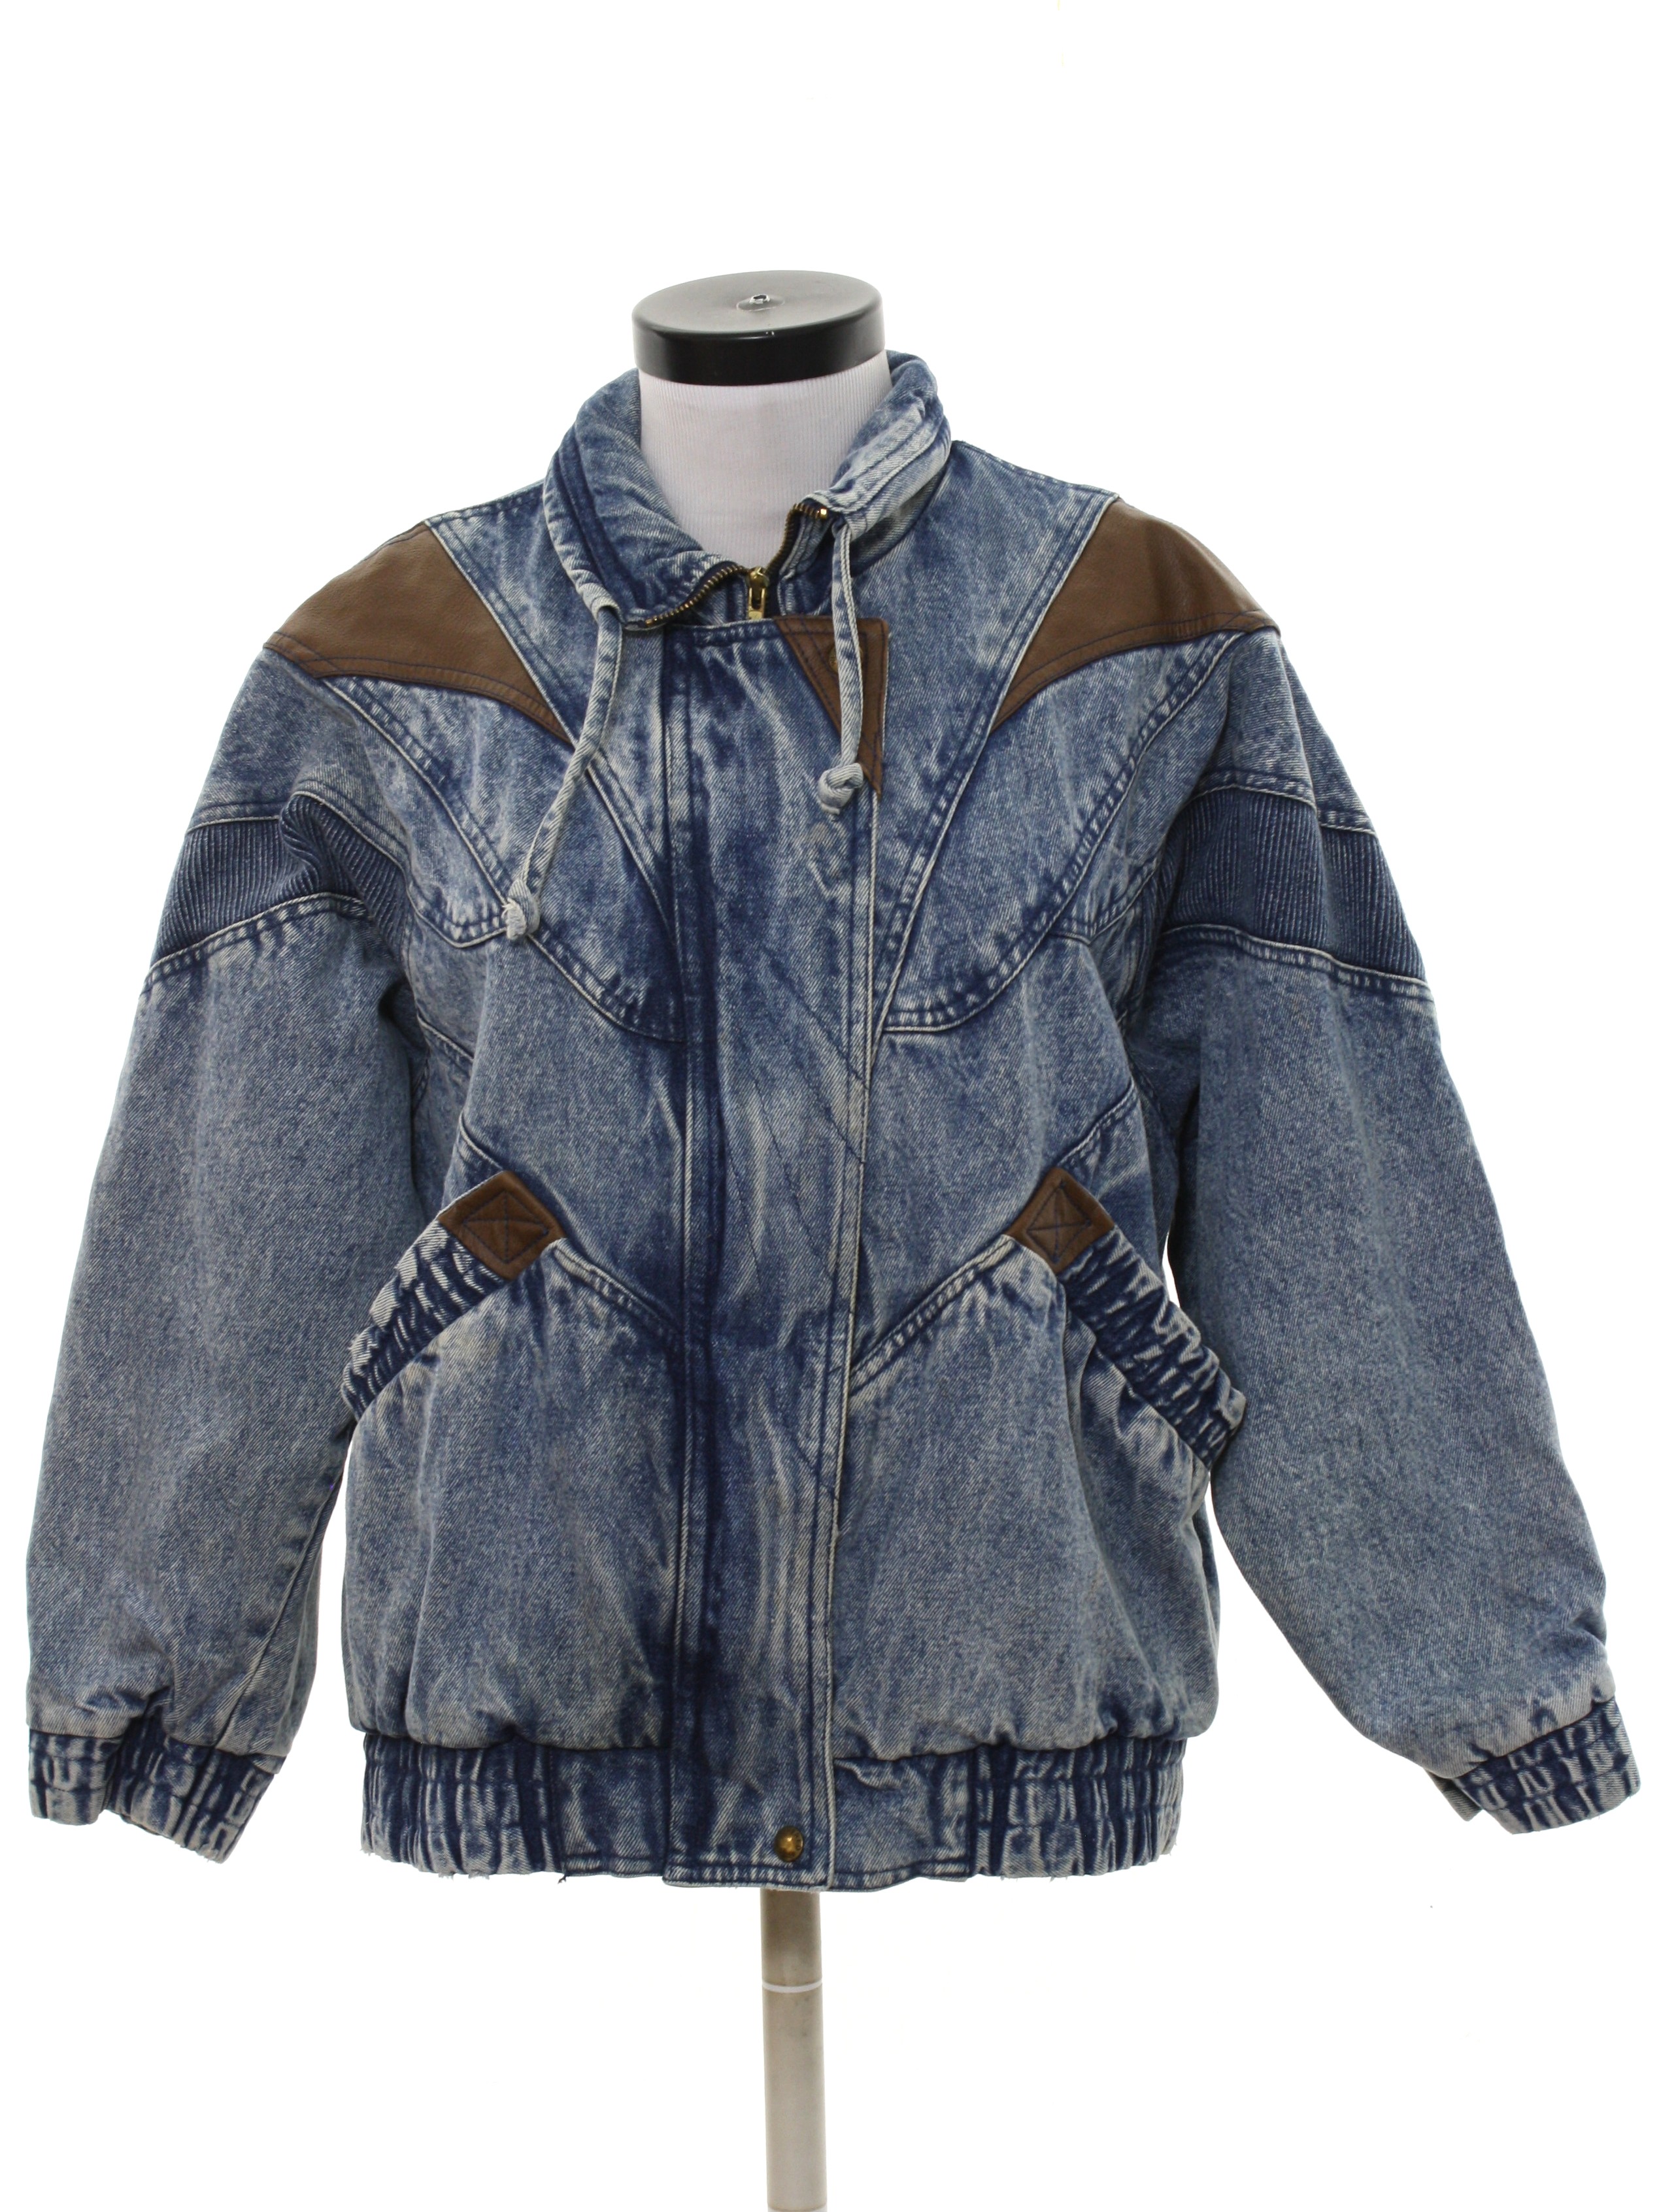 80's Weathered Blues Jacket: Late 80s or Early 90s -Weathered Blues ...